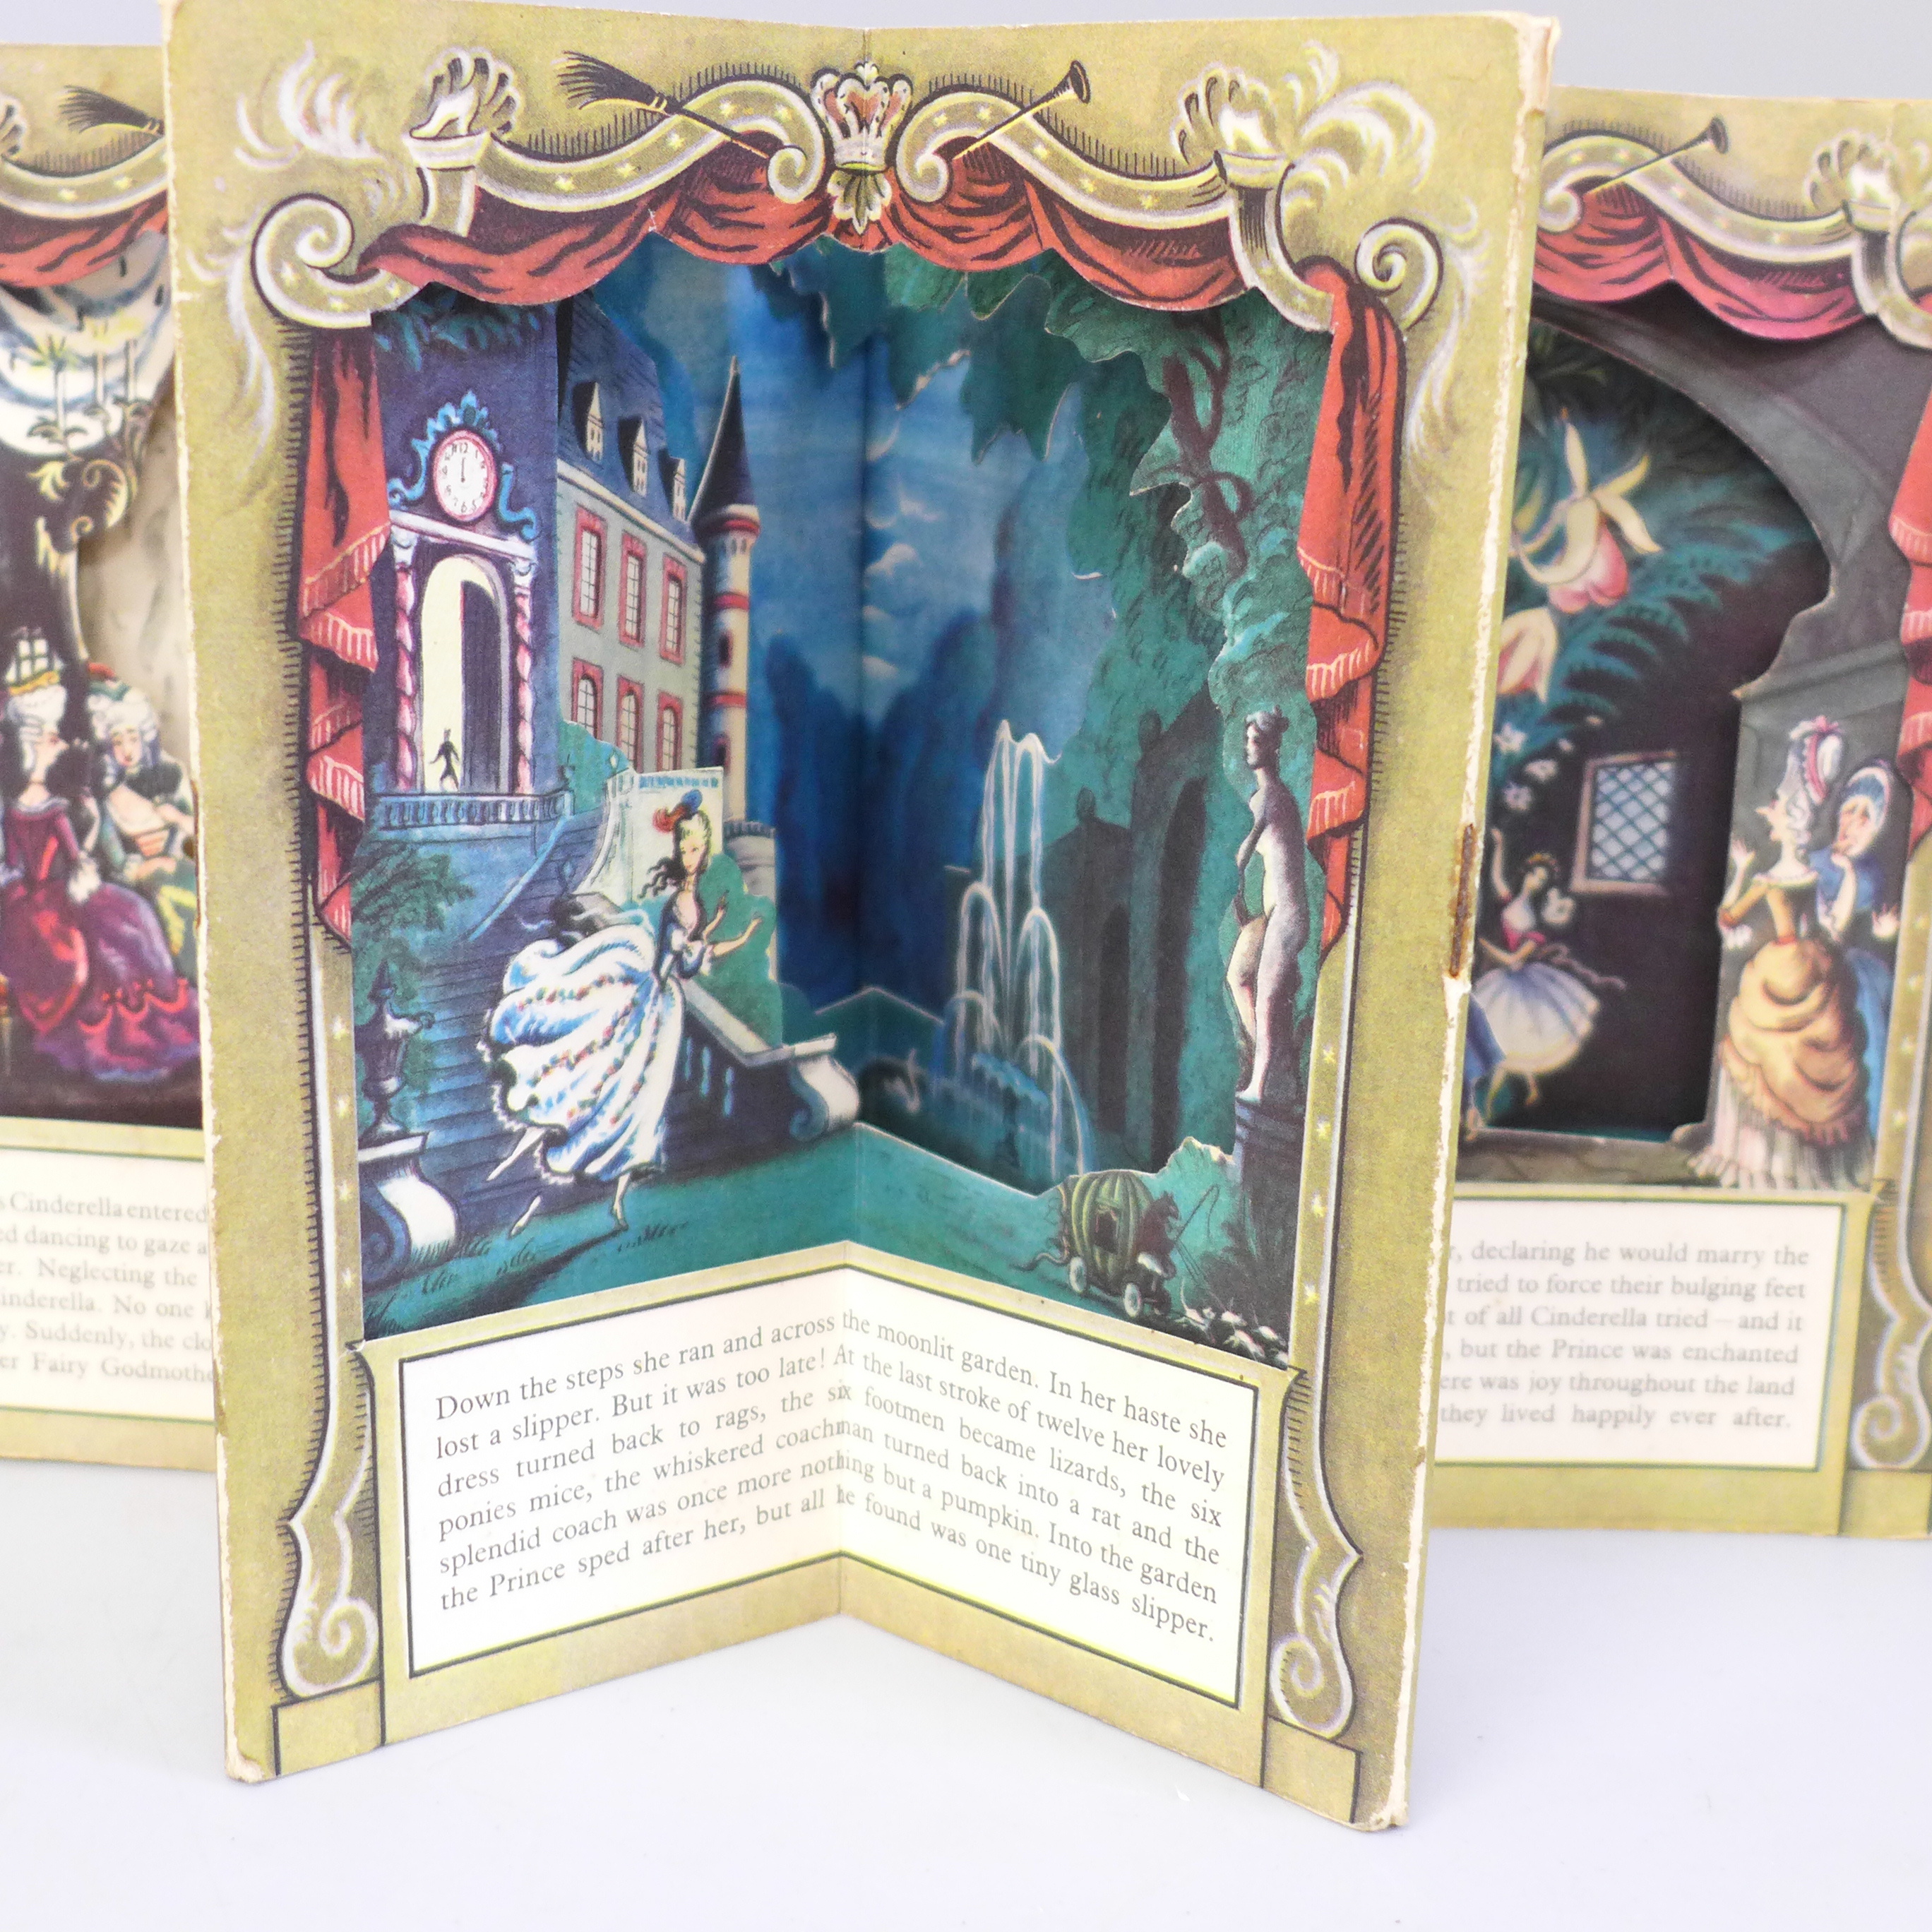 One volume, Cinderella, a Peepshow book, illustrated by Roland Pym - Image 4 of 8